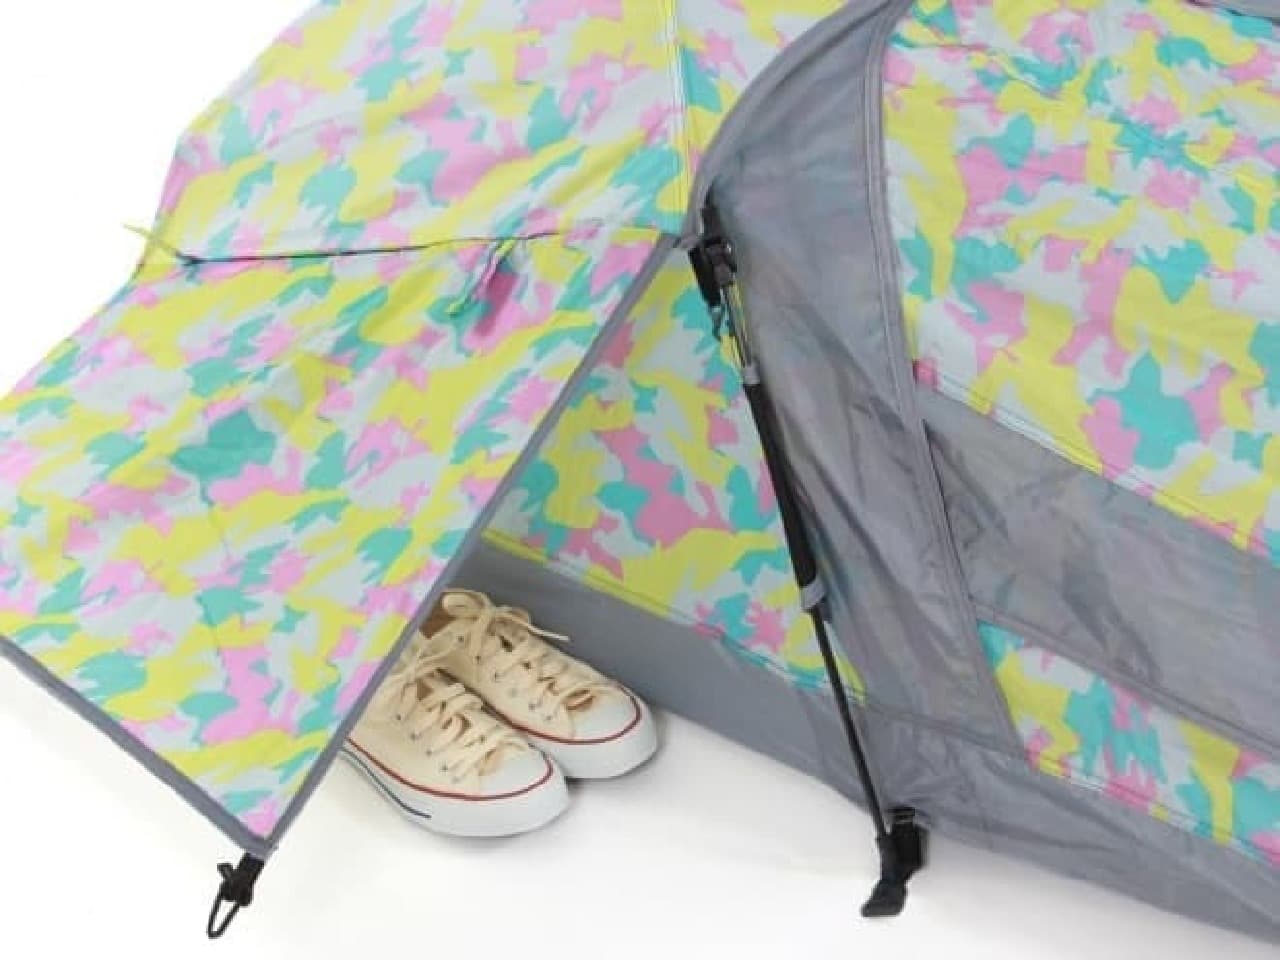 Amenity # 2: Tarp that protects shoes